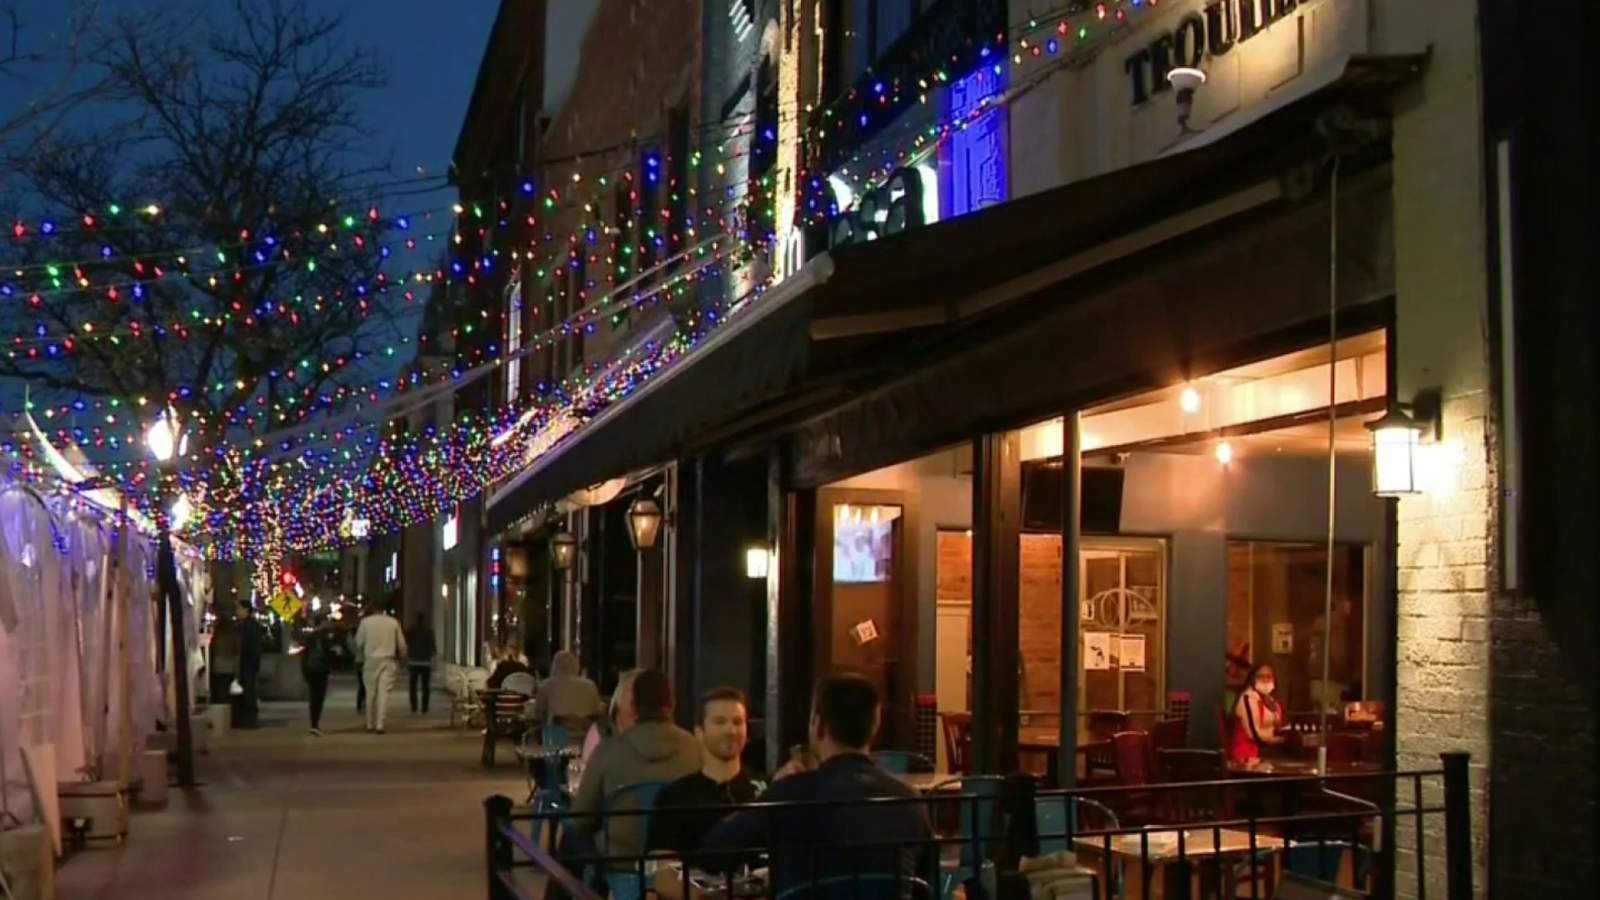 Royal Oak approves social district with outdoor drinking